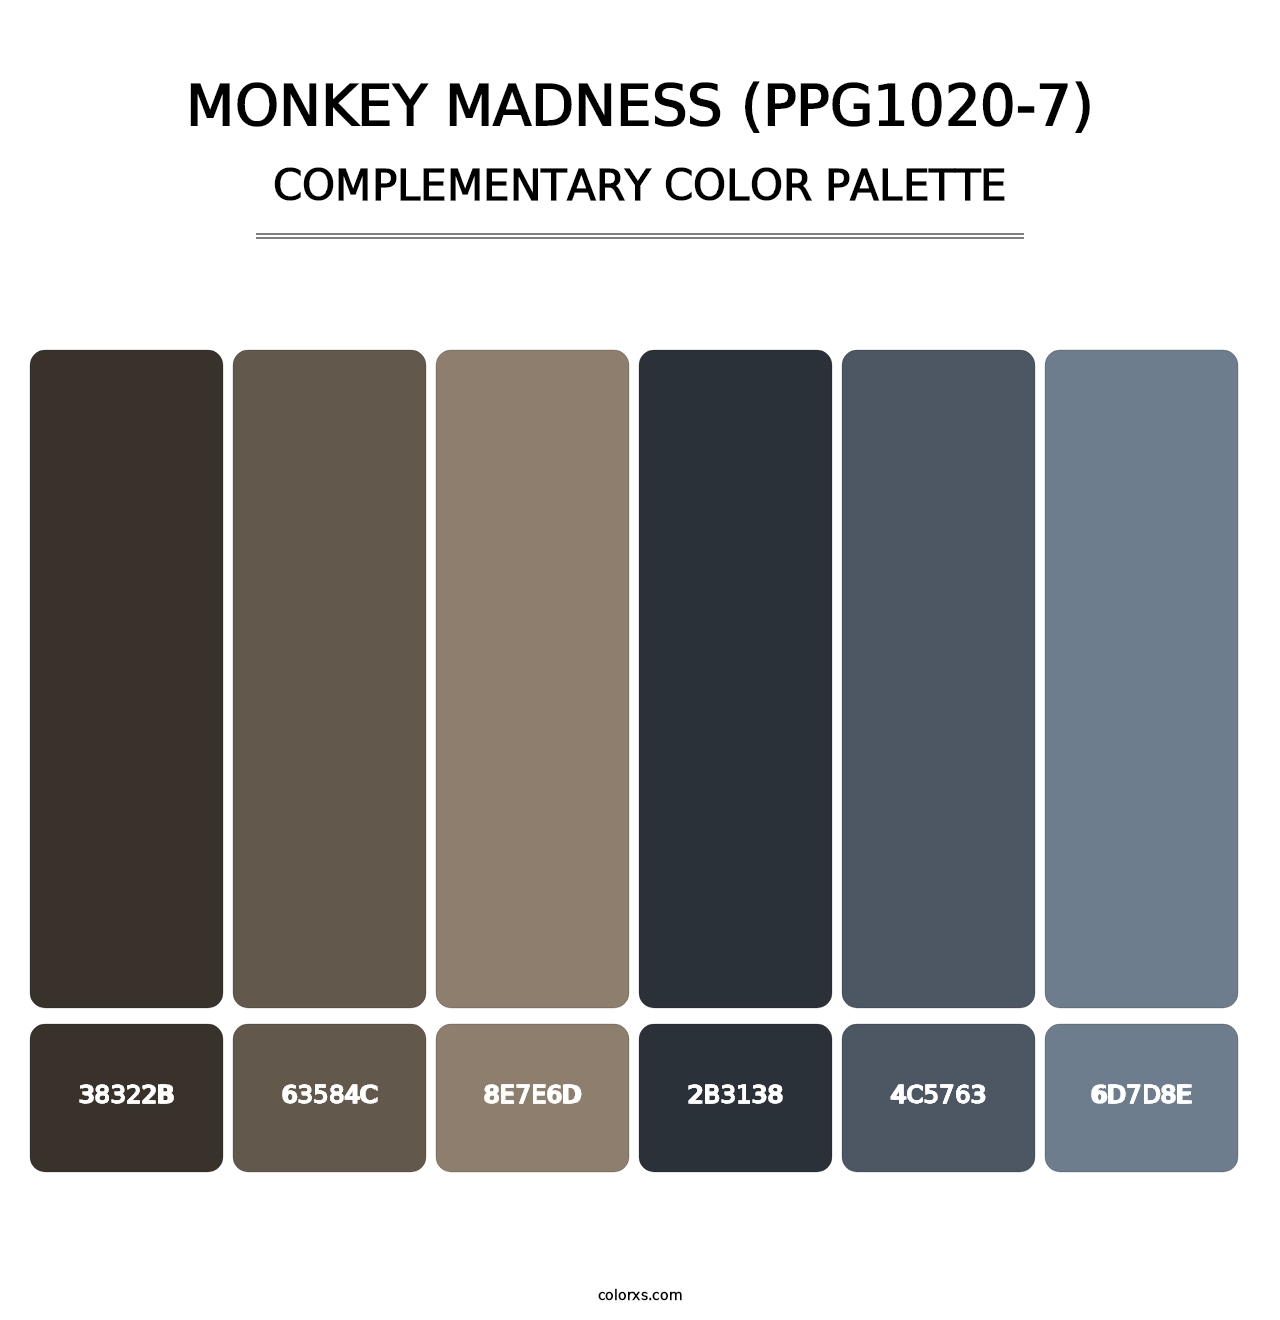 Monkey Madness (PPG1020-7) - Complementary Color Palette